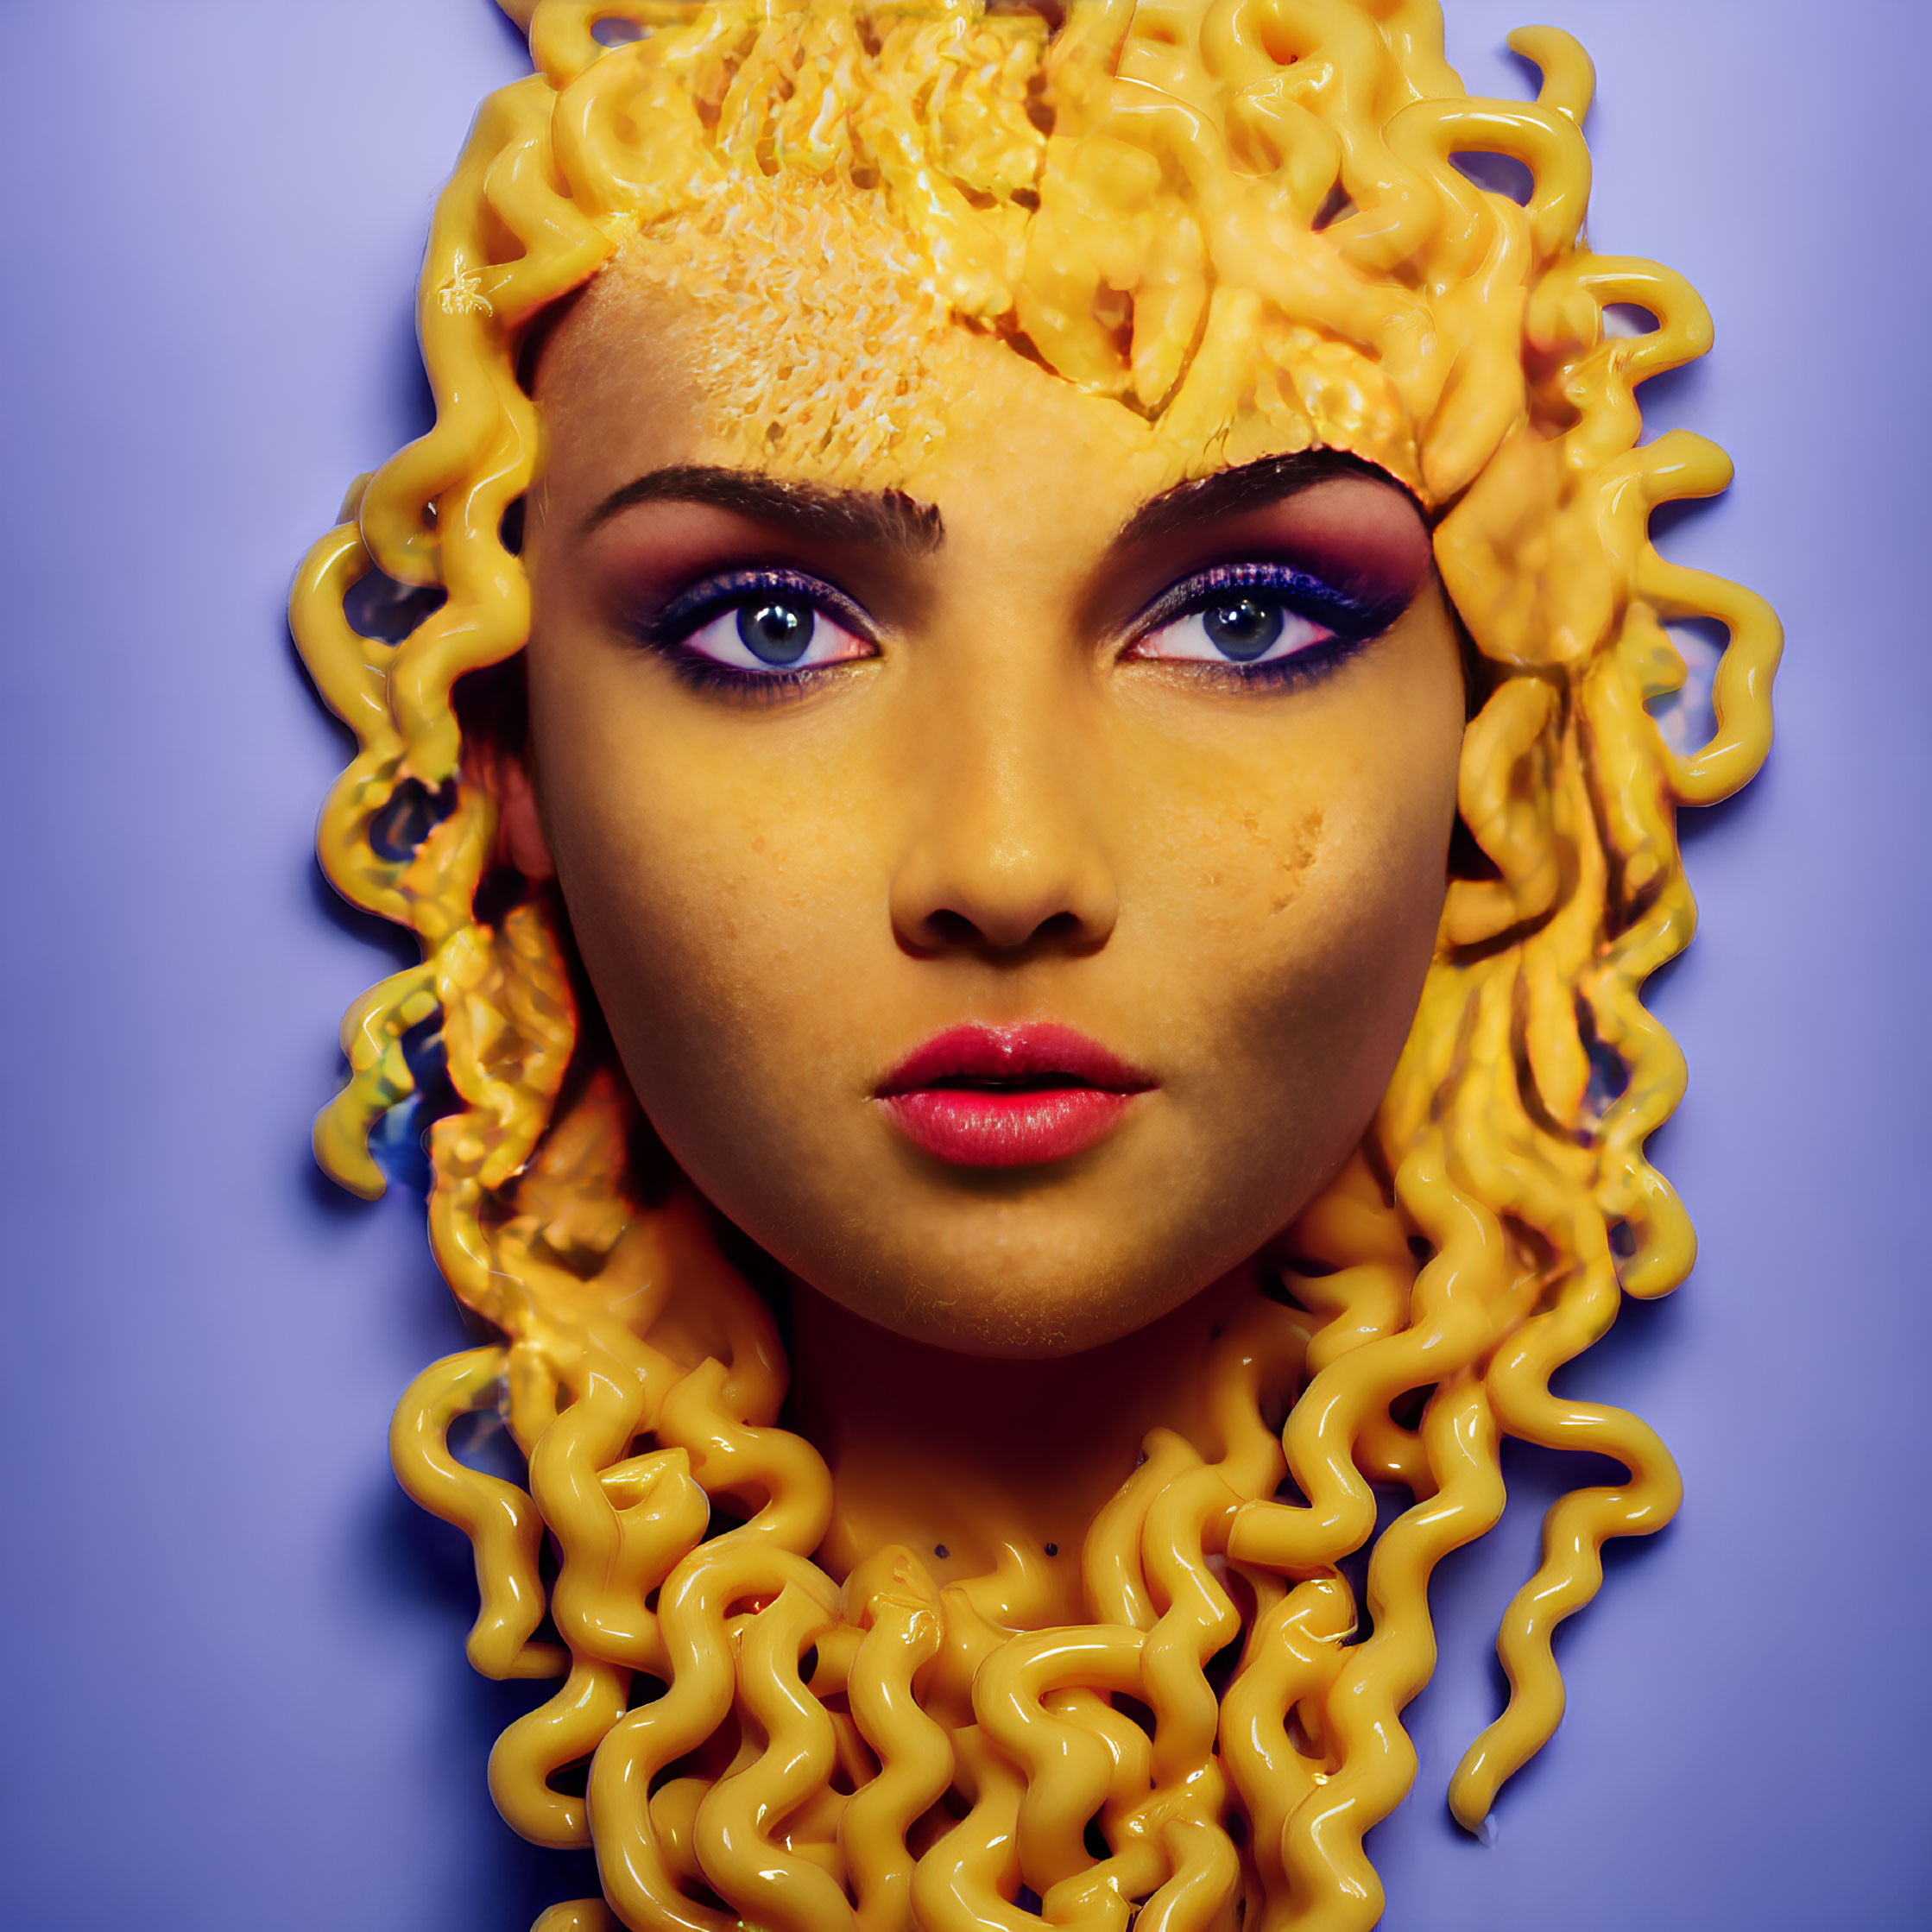 Creative Noodle Hairstyle and Face Art on Blue Background